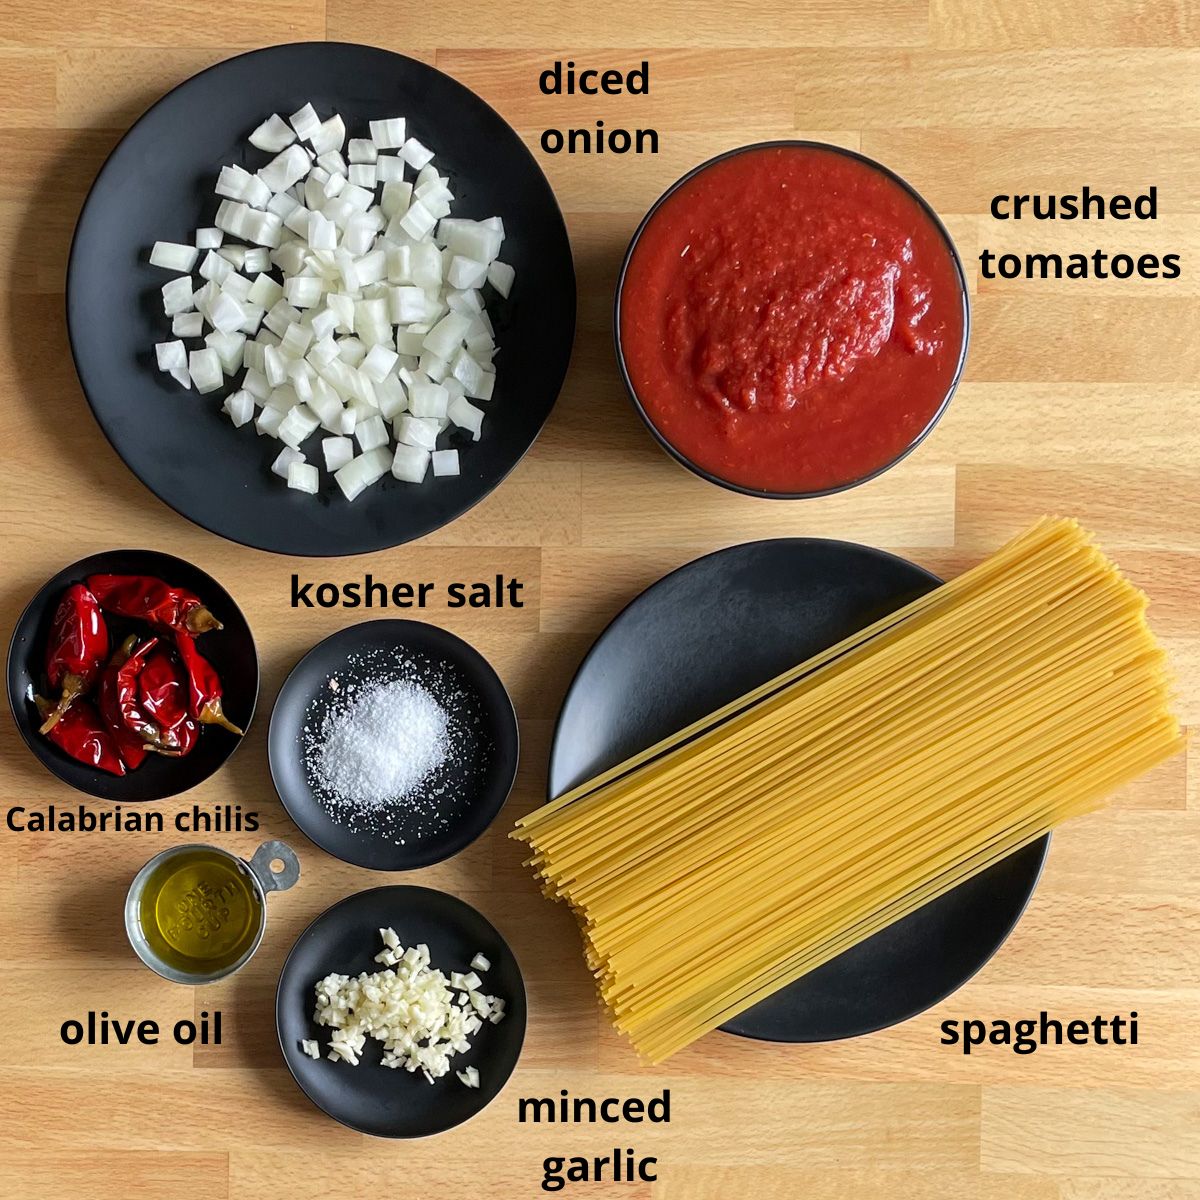 Diced onion, crushed tomatoes, Calabrian chilis, kosher salt, olive oil, minced garlic, and spaghetti sit on black plates on a butcher block cutting board. Each item is labeled in black print.